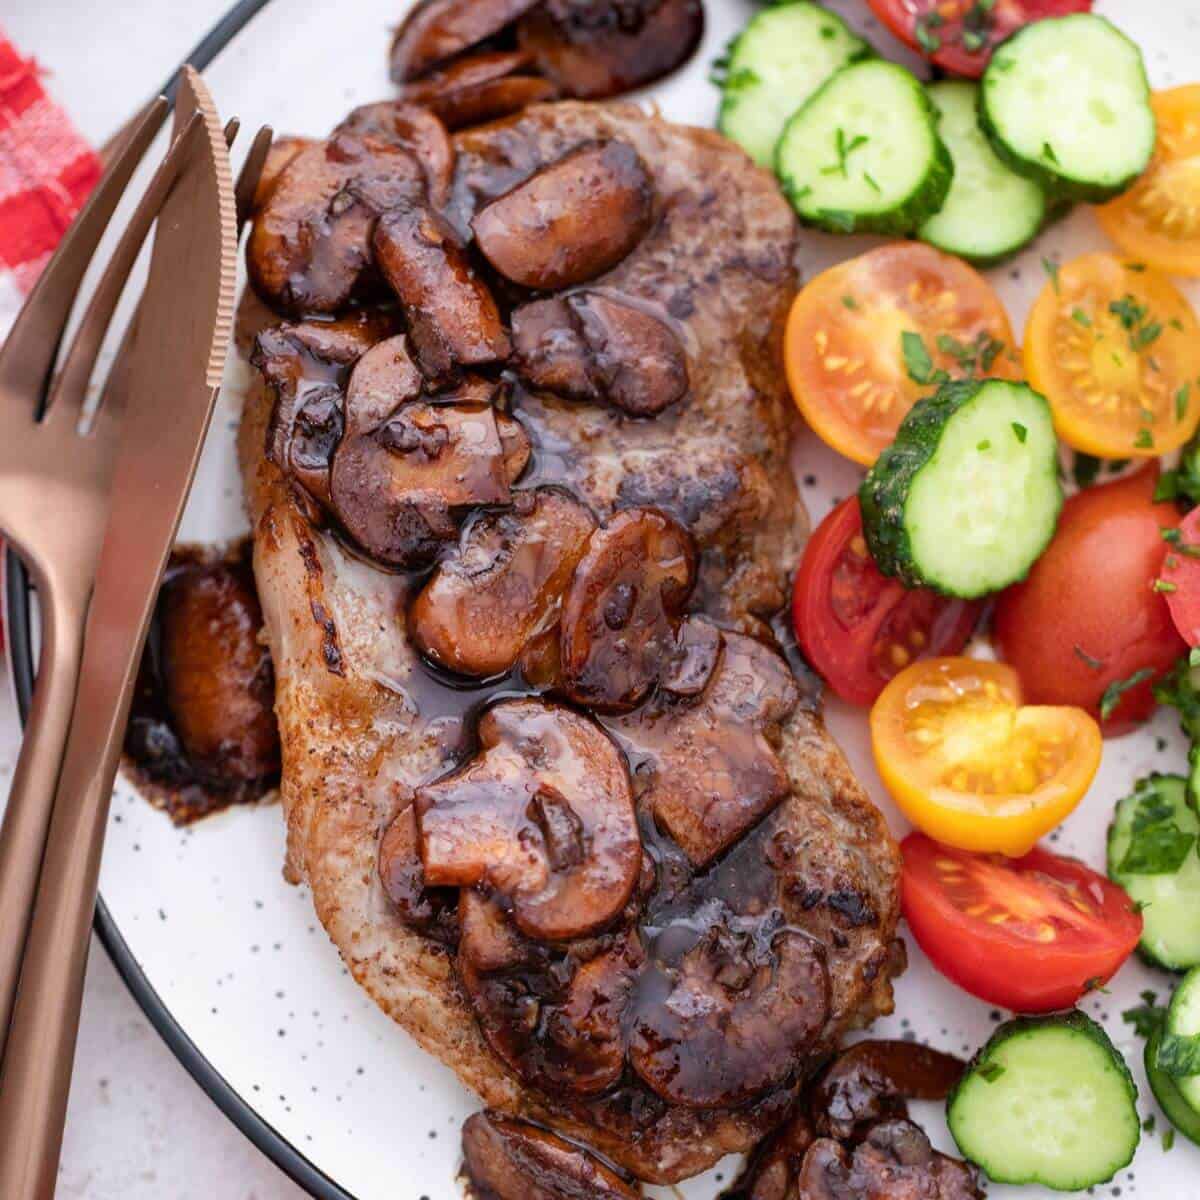 Steak and mushrooms with tomatoes on a plate.